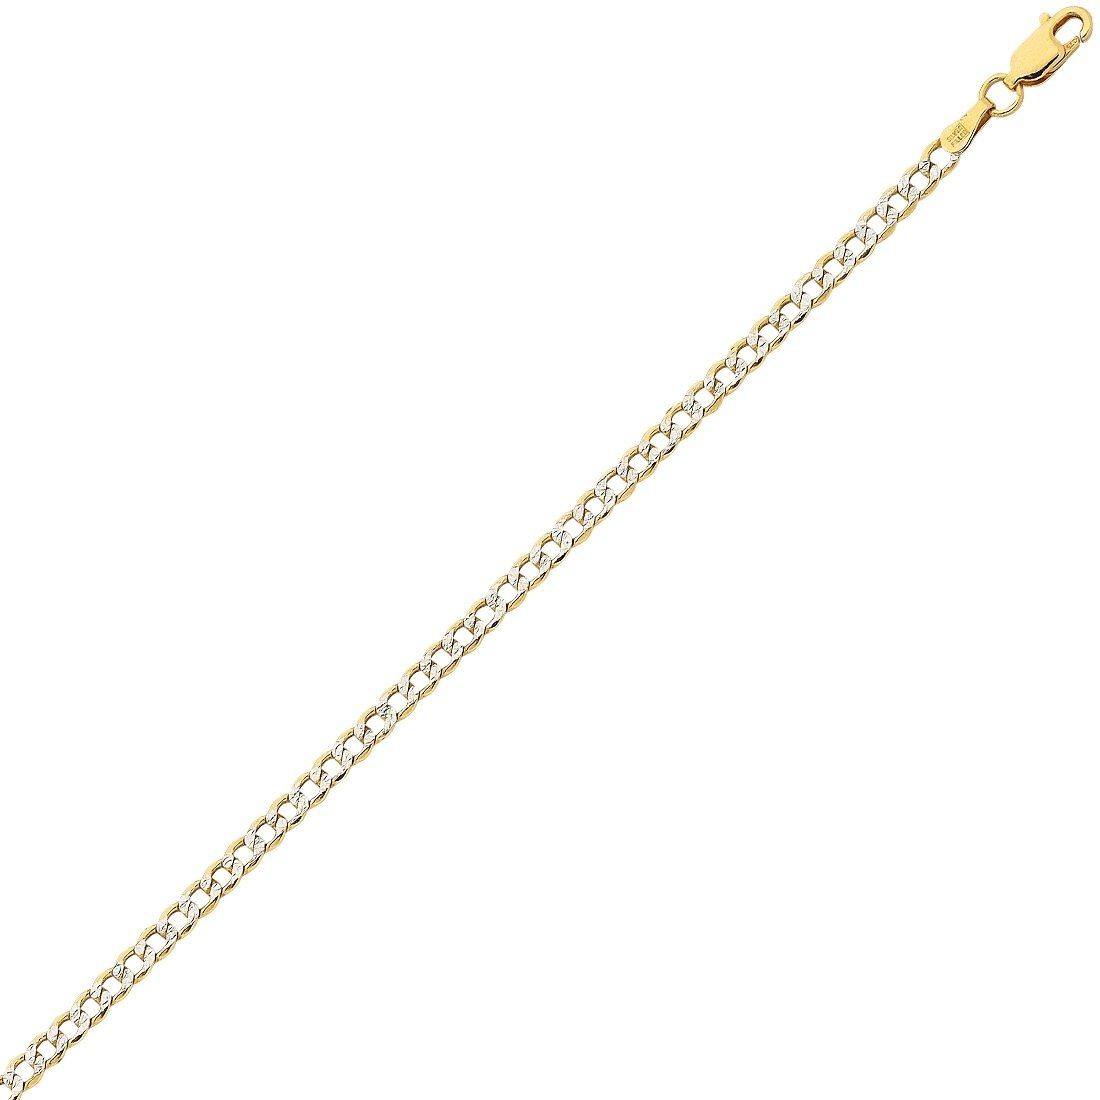 9ct Yellow Gold Silver Infused 2 Tone Diamond Cut Curb Necklace 55cm Necklaces Bevilles 